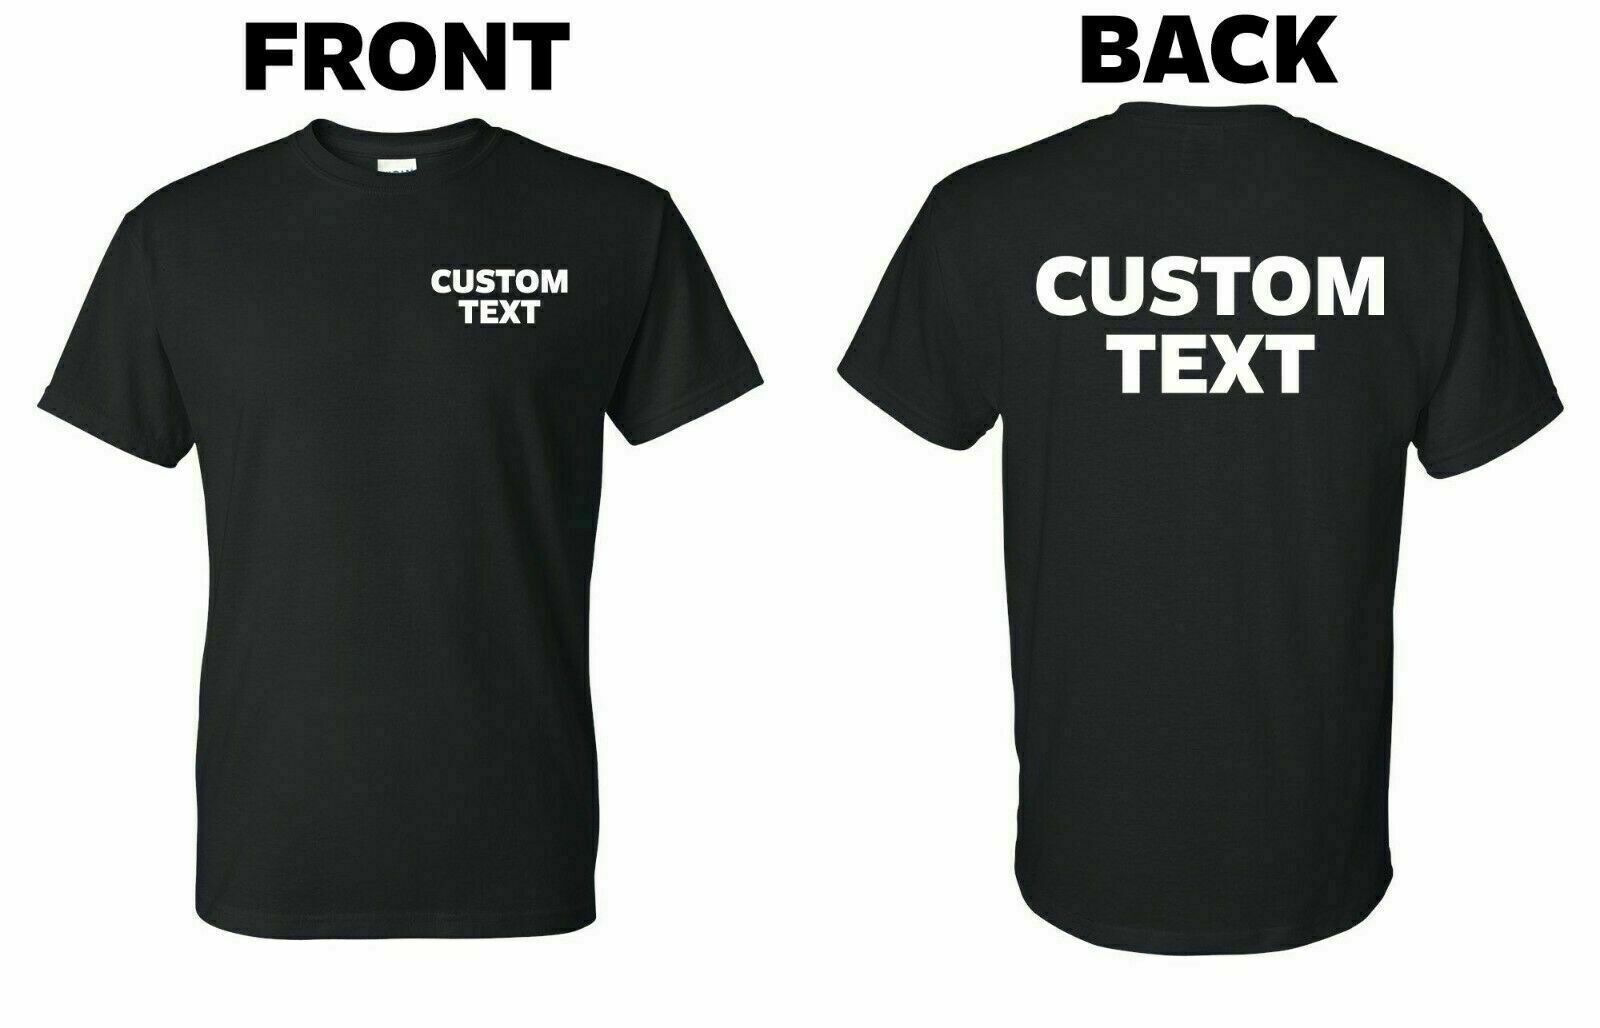 Custom T-Shirt, Personalized, Add Your Own Text, Advertise Your Business